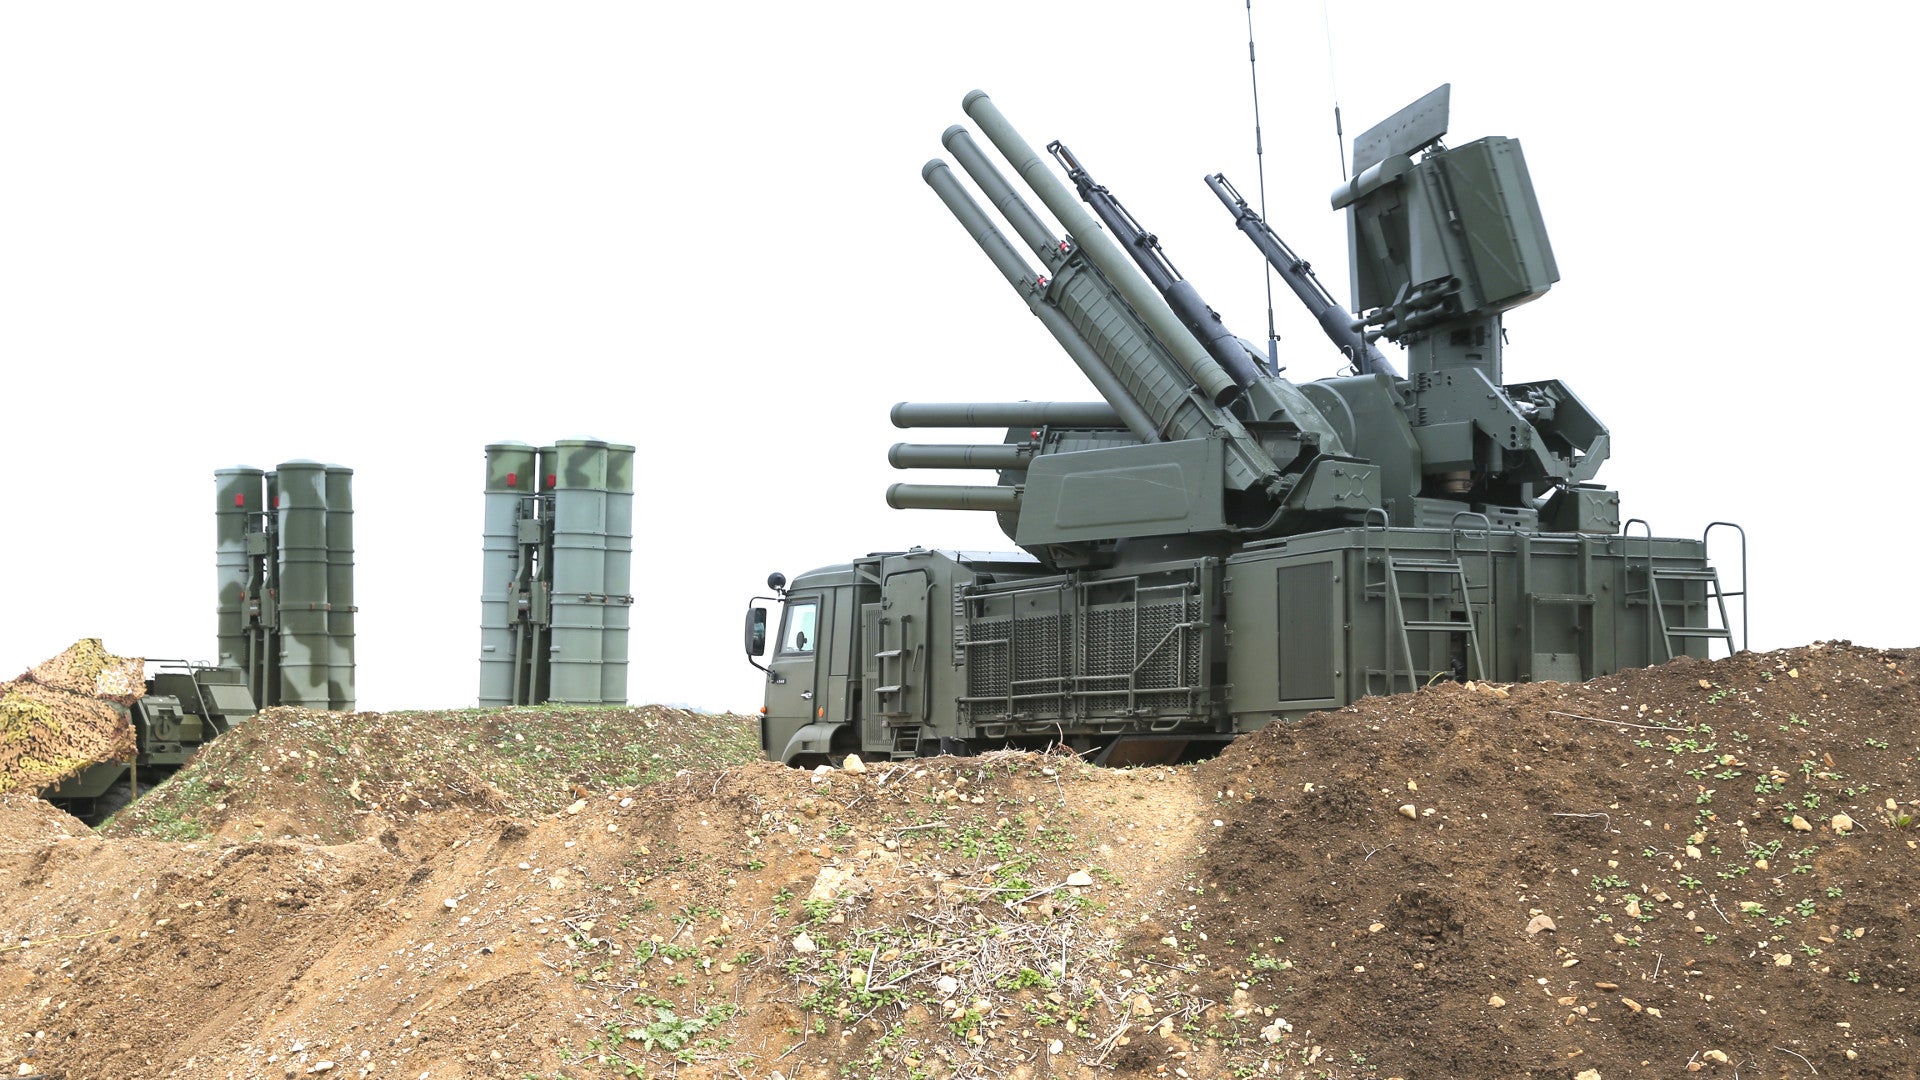 It’s Official, Russia and Syria Have Linked Their Air Defense Networks